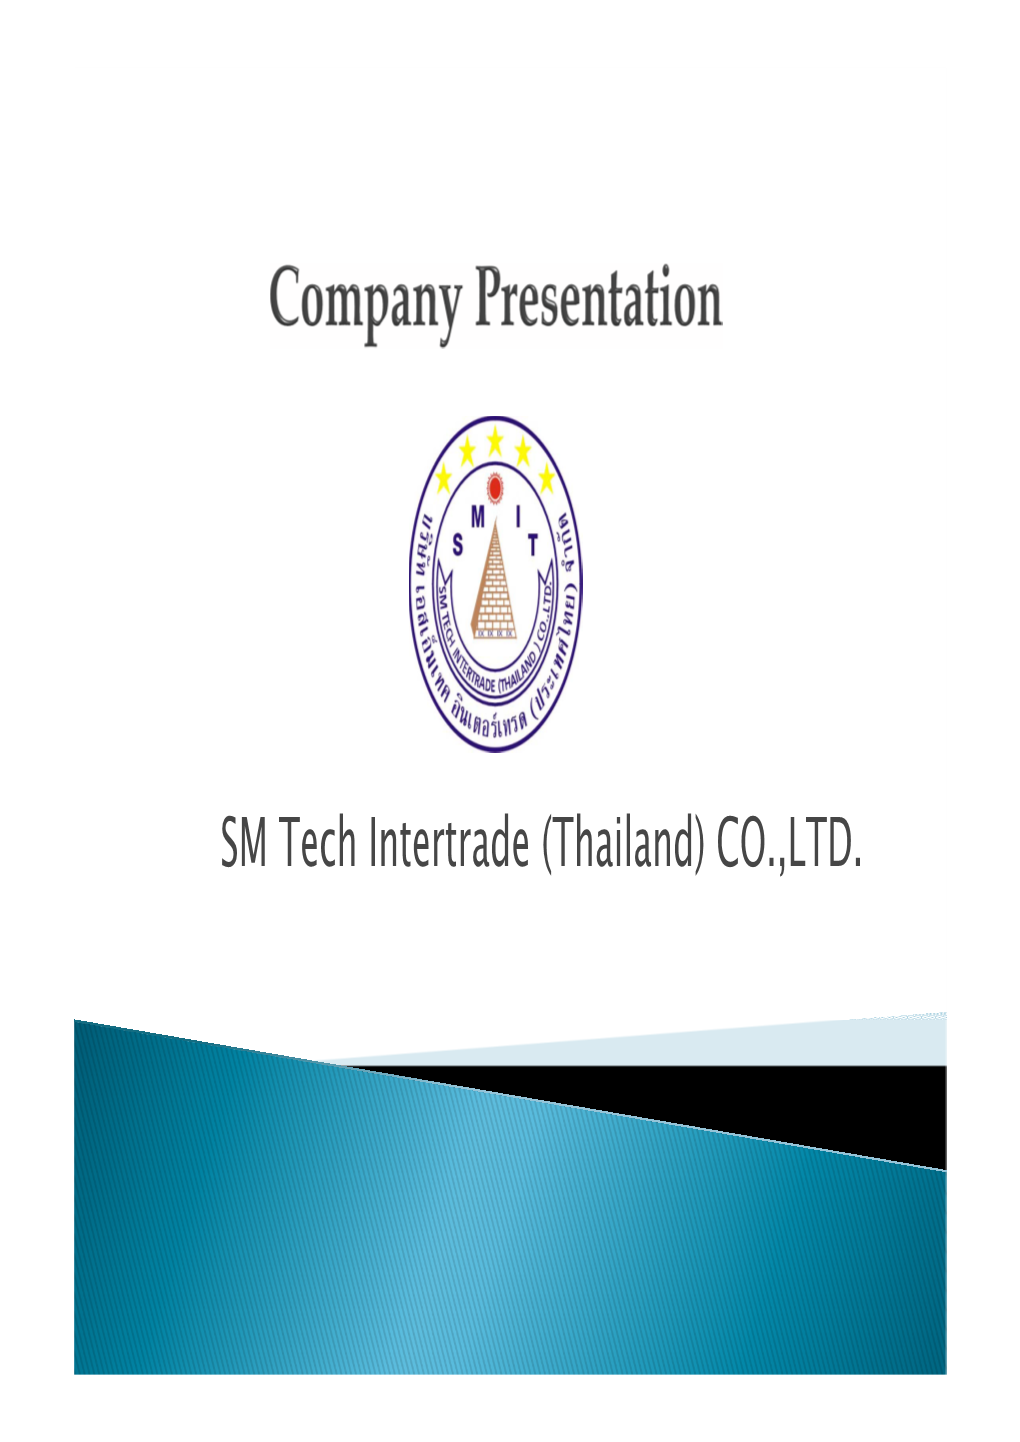 SM Tech Intertrade (Thailand) CO.,LTD. SM Tech Intertrade Is an Industrial Equipments Systems Trading and Consulting Company